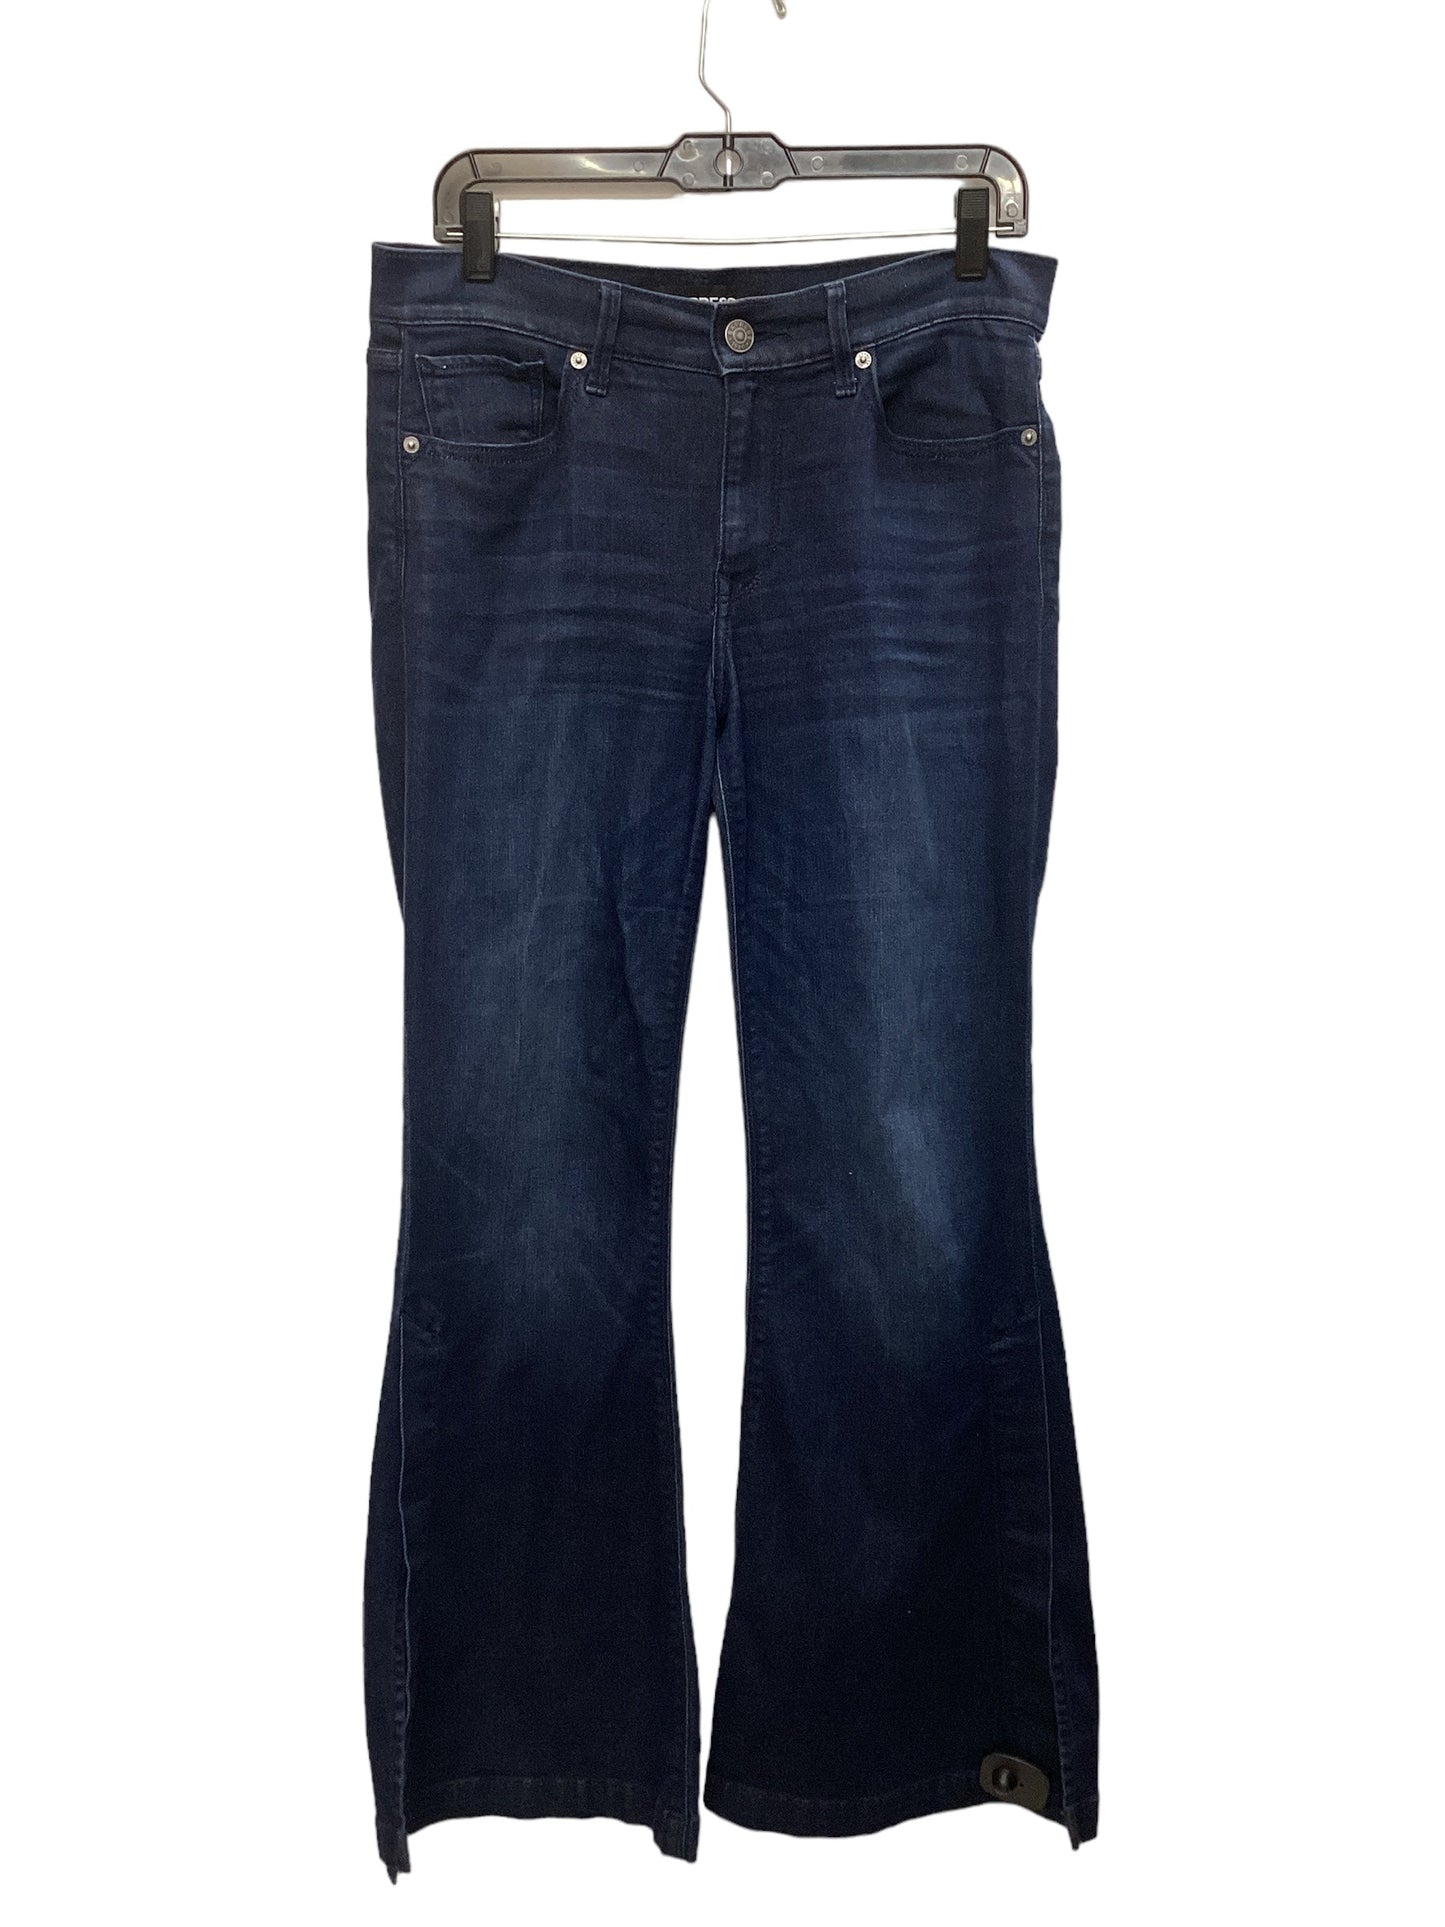 Blue Jeans Flared Express, Size 8